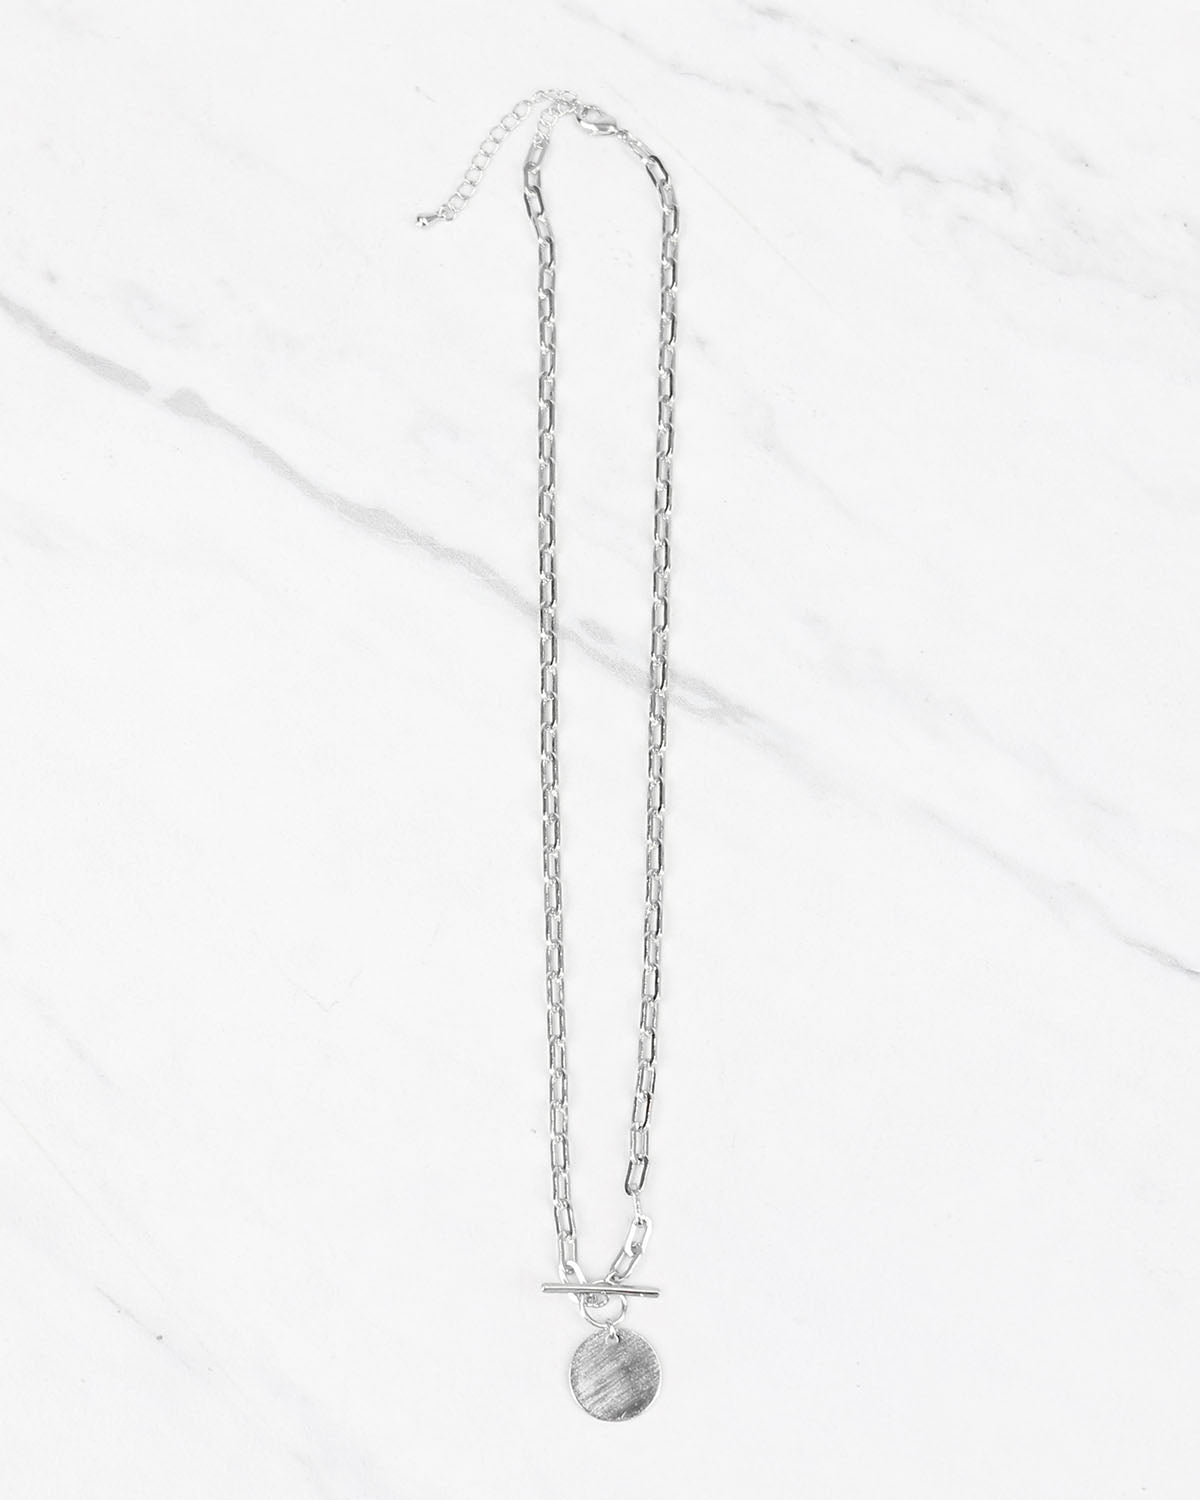 Ring & Bar Pendant Necklace in Silver